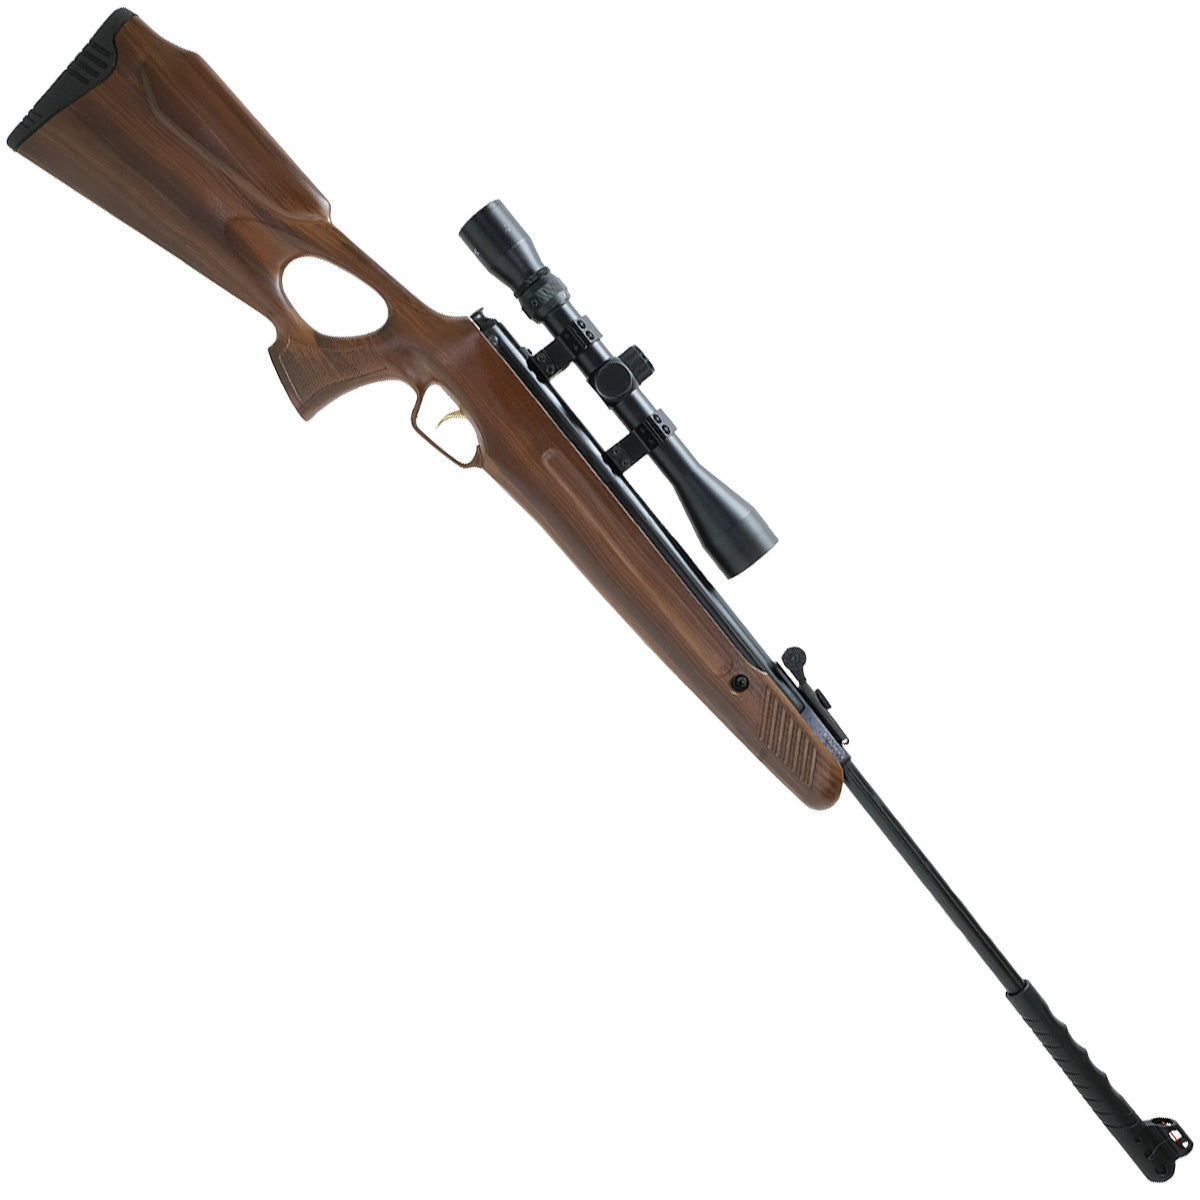 SALIX, TRIMEX ARMS TX05 BREAK BARREL SPRING AIR RIFLE WITH SYNTHETIC WOOD LOOK STOCK .22